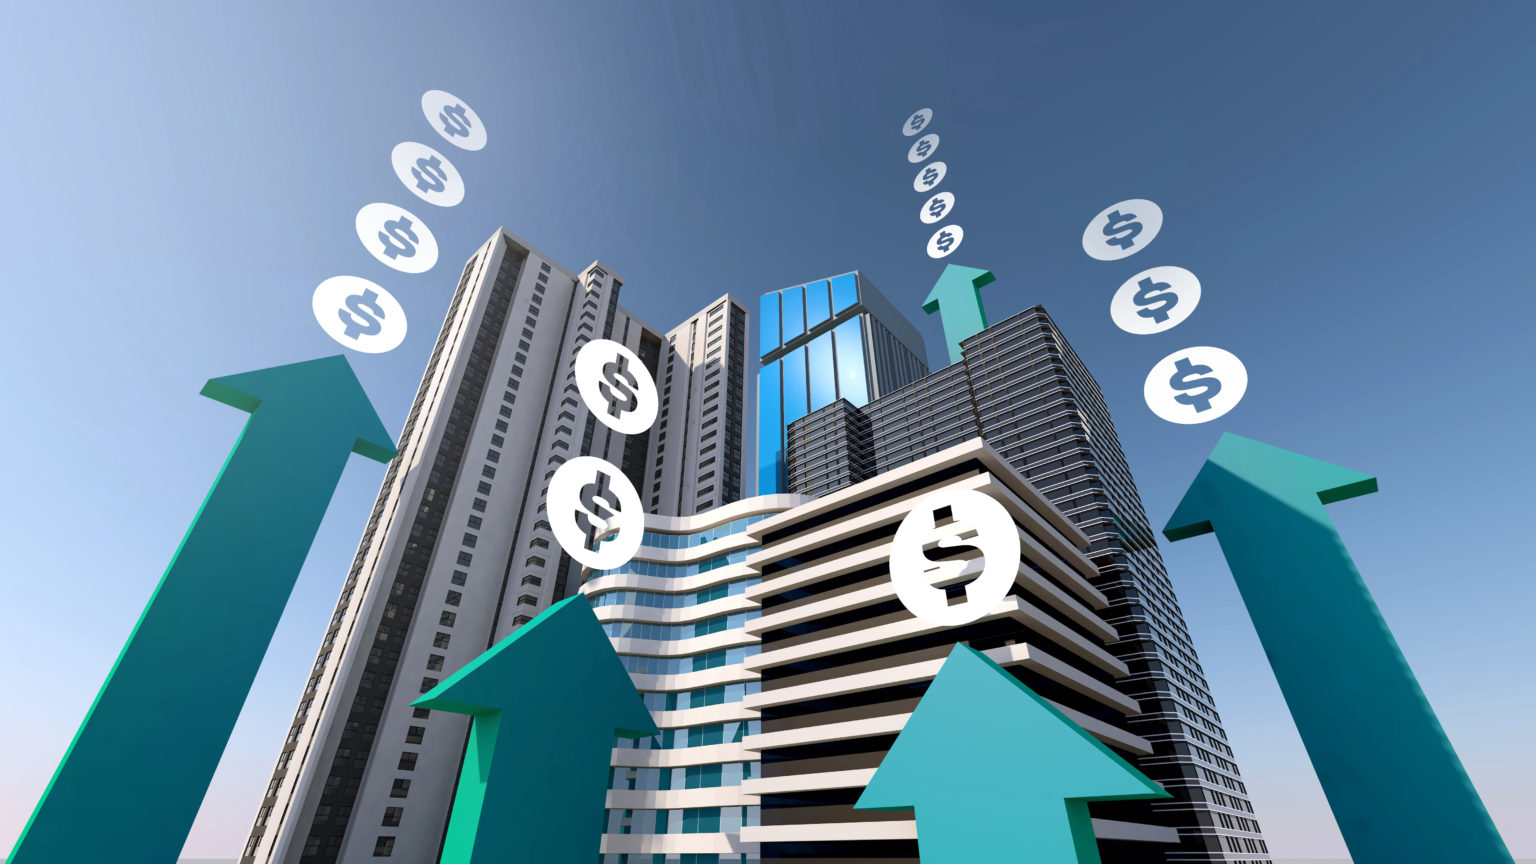 Skyscrapers with arrows and dollar signs rising around them. Investment. Essential Considerations for CRE Investments Based On Current Issues